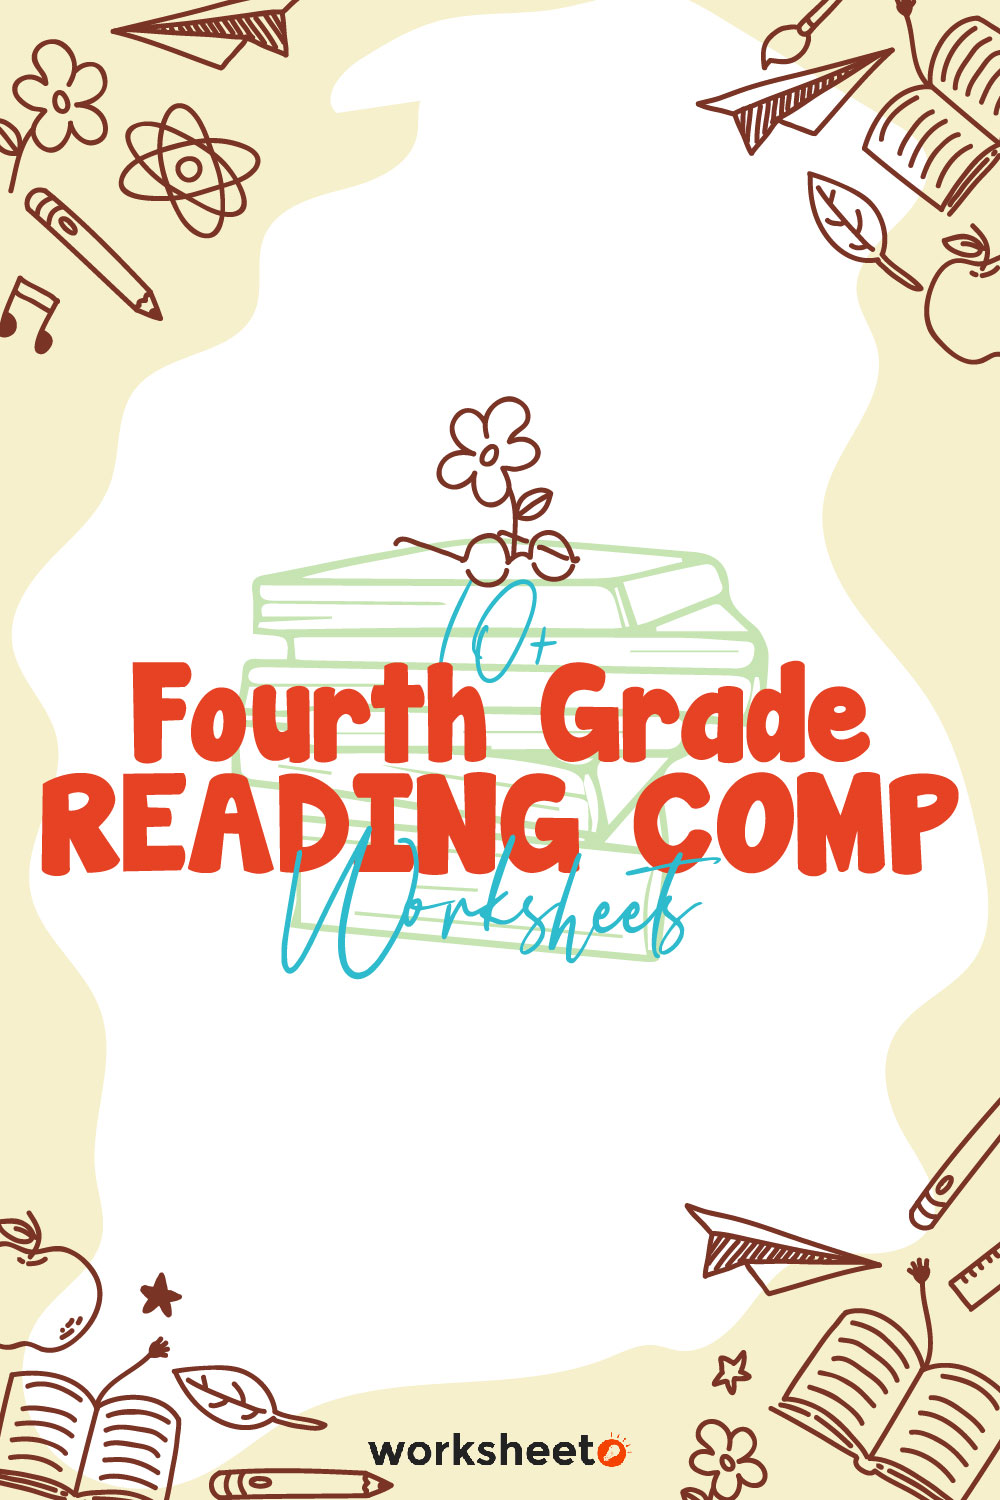 15 Images of Fourth Grade Reading Comp Worksheets